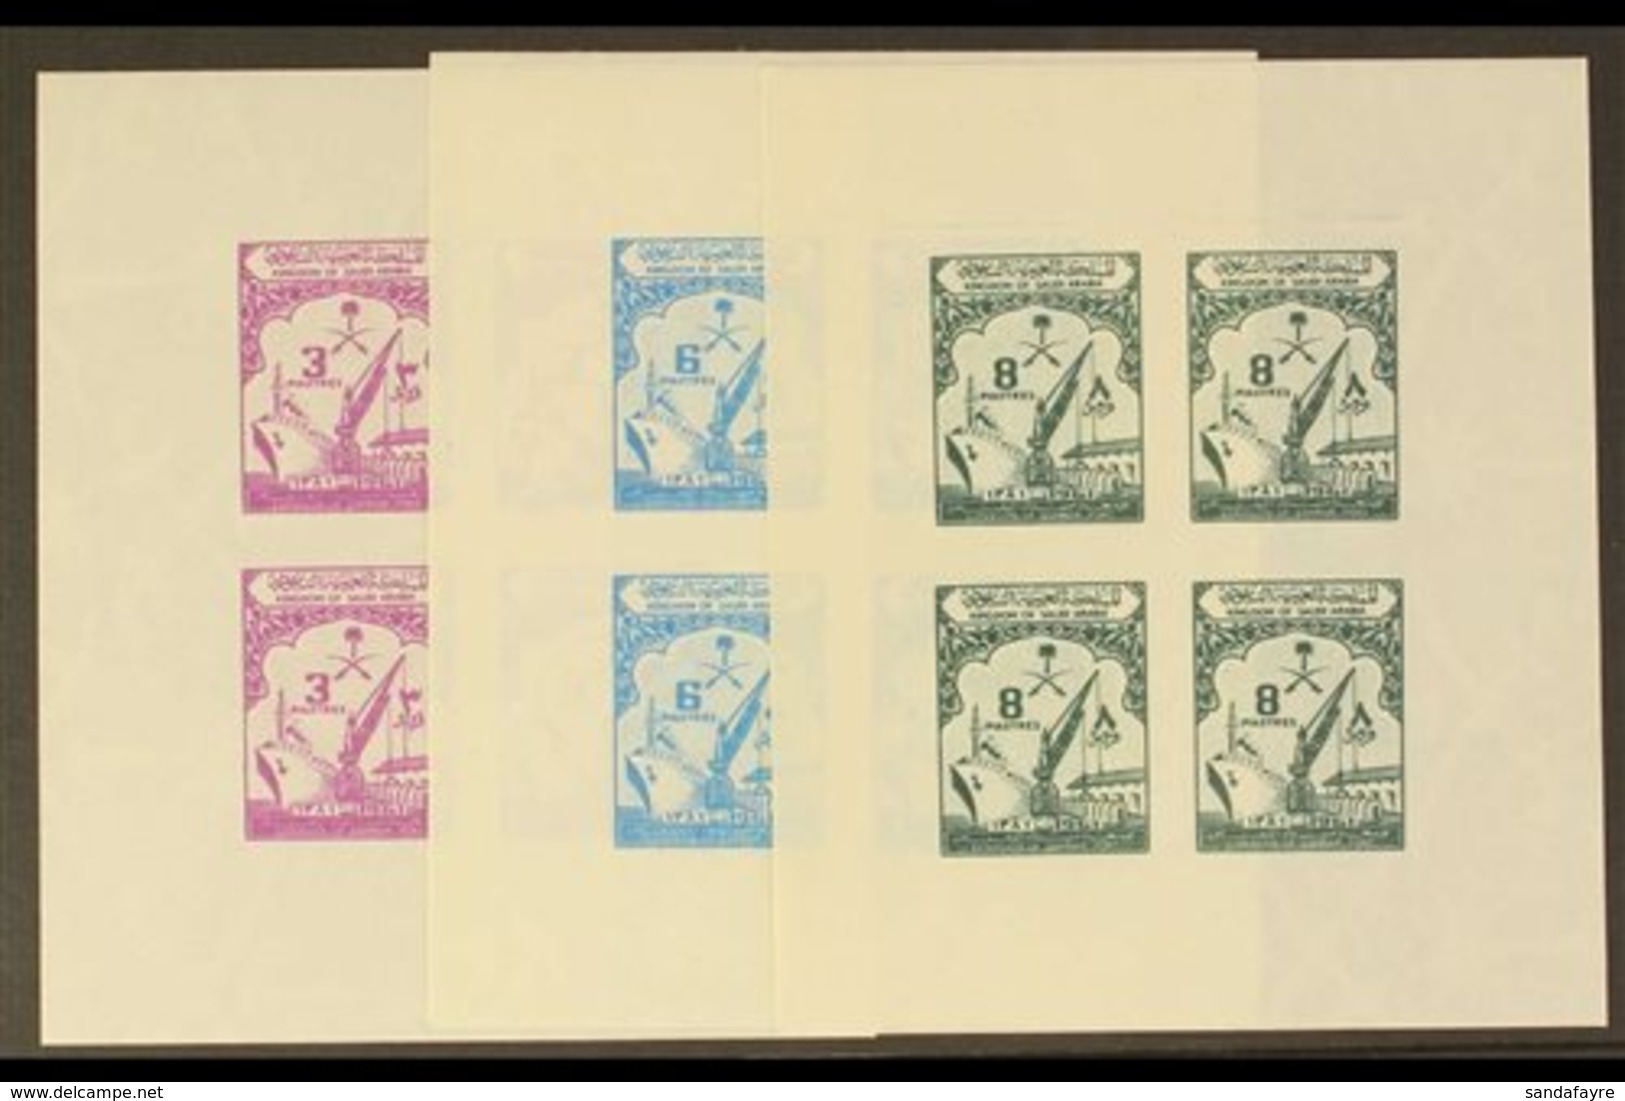 1961  1961 Opening Of Dammam Port Extension Set Of Three As IMPERFORATE MINIATURE SHEETS With Watermark Sideways And Eac - Saudi Arabia